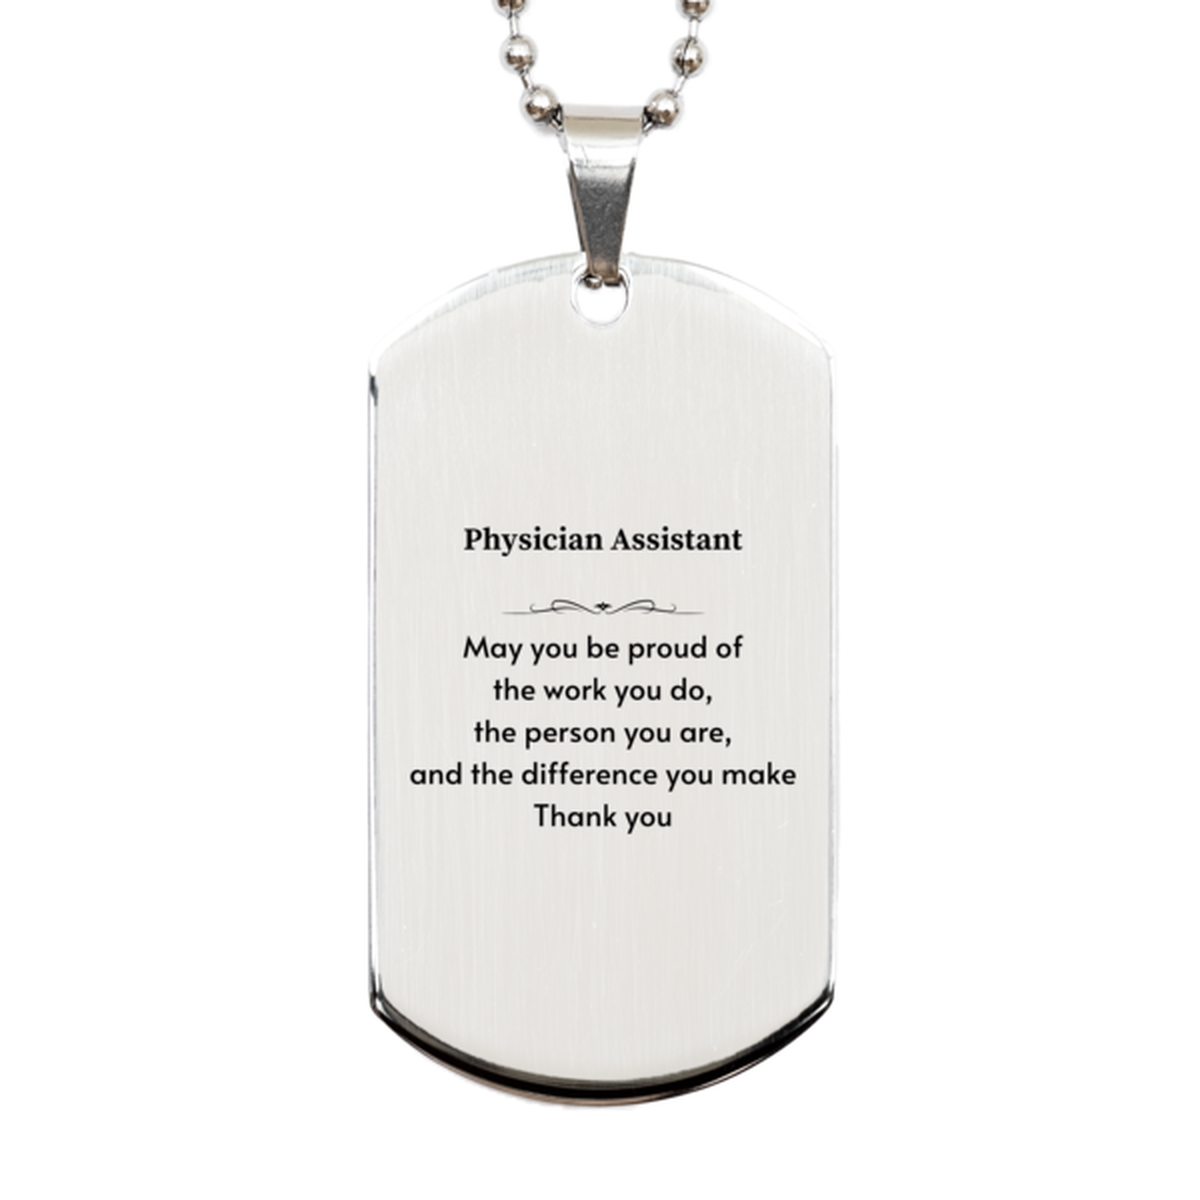 Heartwarming Silver Dog Tag Retirement Coworkers Gifts for Physician Assistant, Physician Assistant May You be proud of the work you do, the person you are Gifts for Boss Men Women Friends